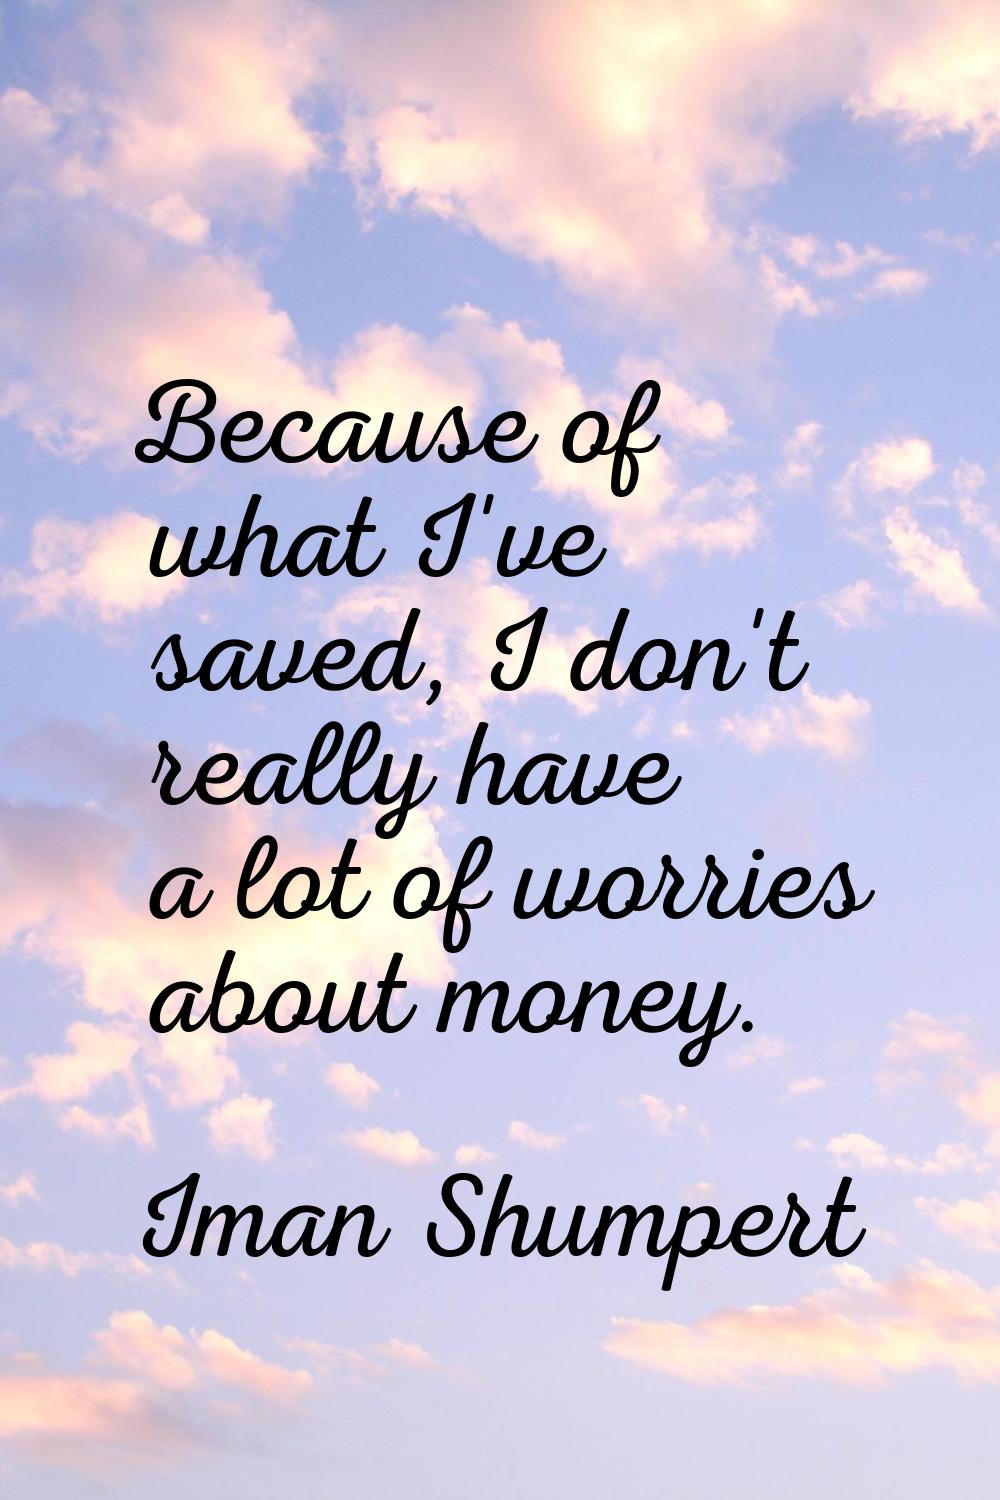 Because of what I've saved, I don't really have a lot of worries about money.